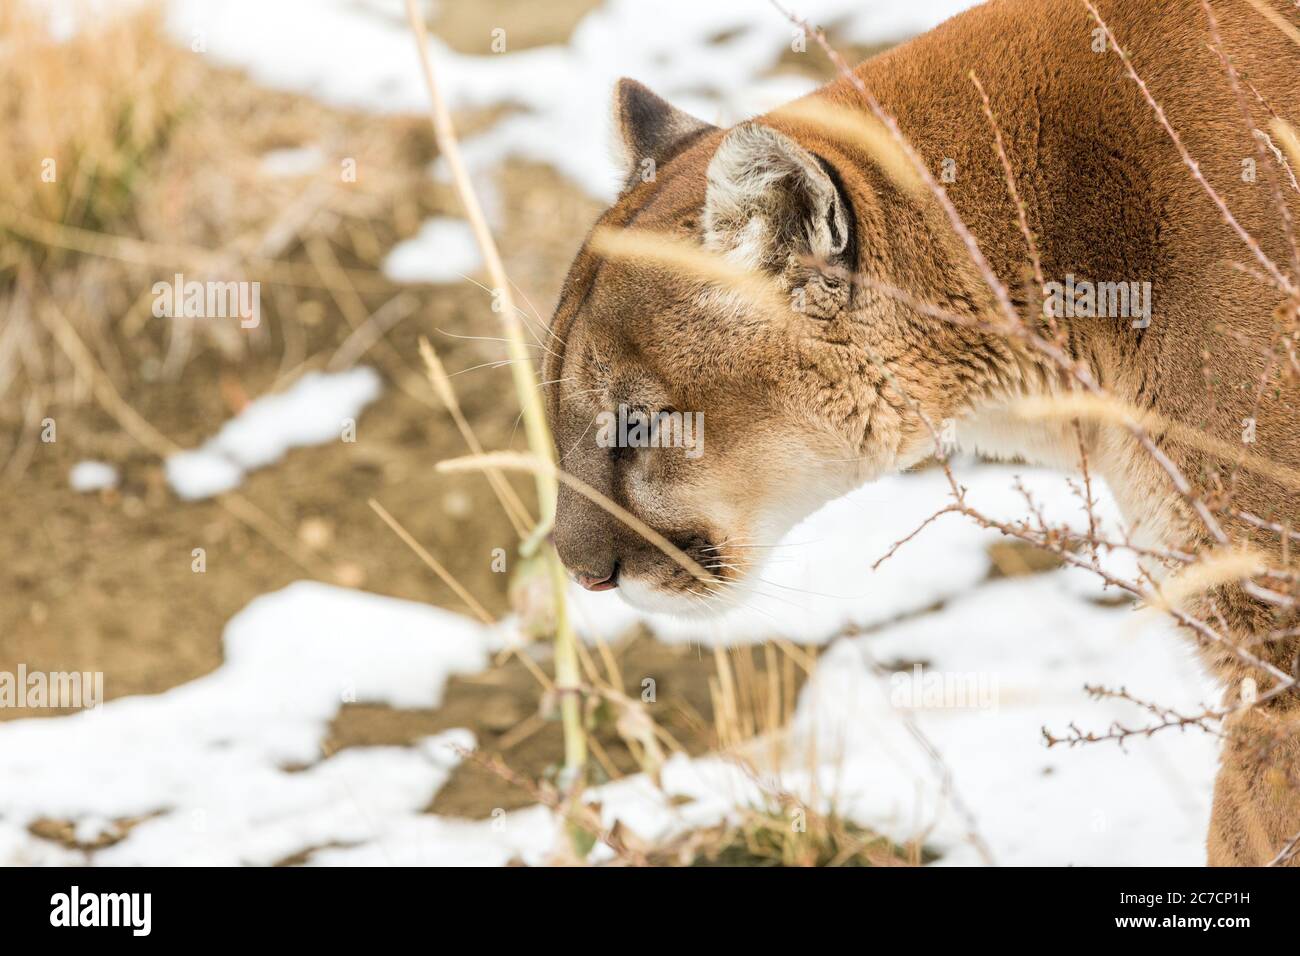 Rescued mountain lion in open area outdoors at wildlife sanctuary park Stock Photo